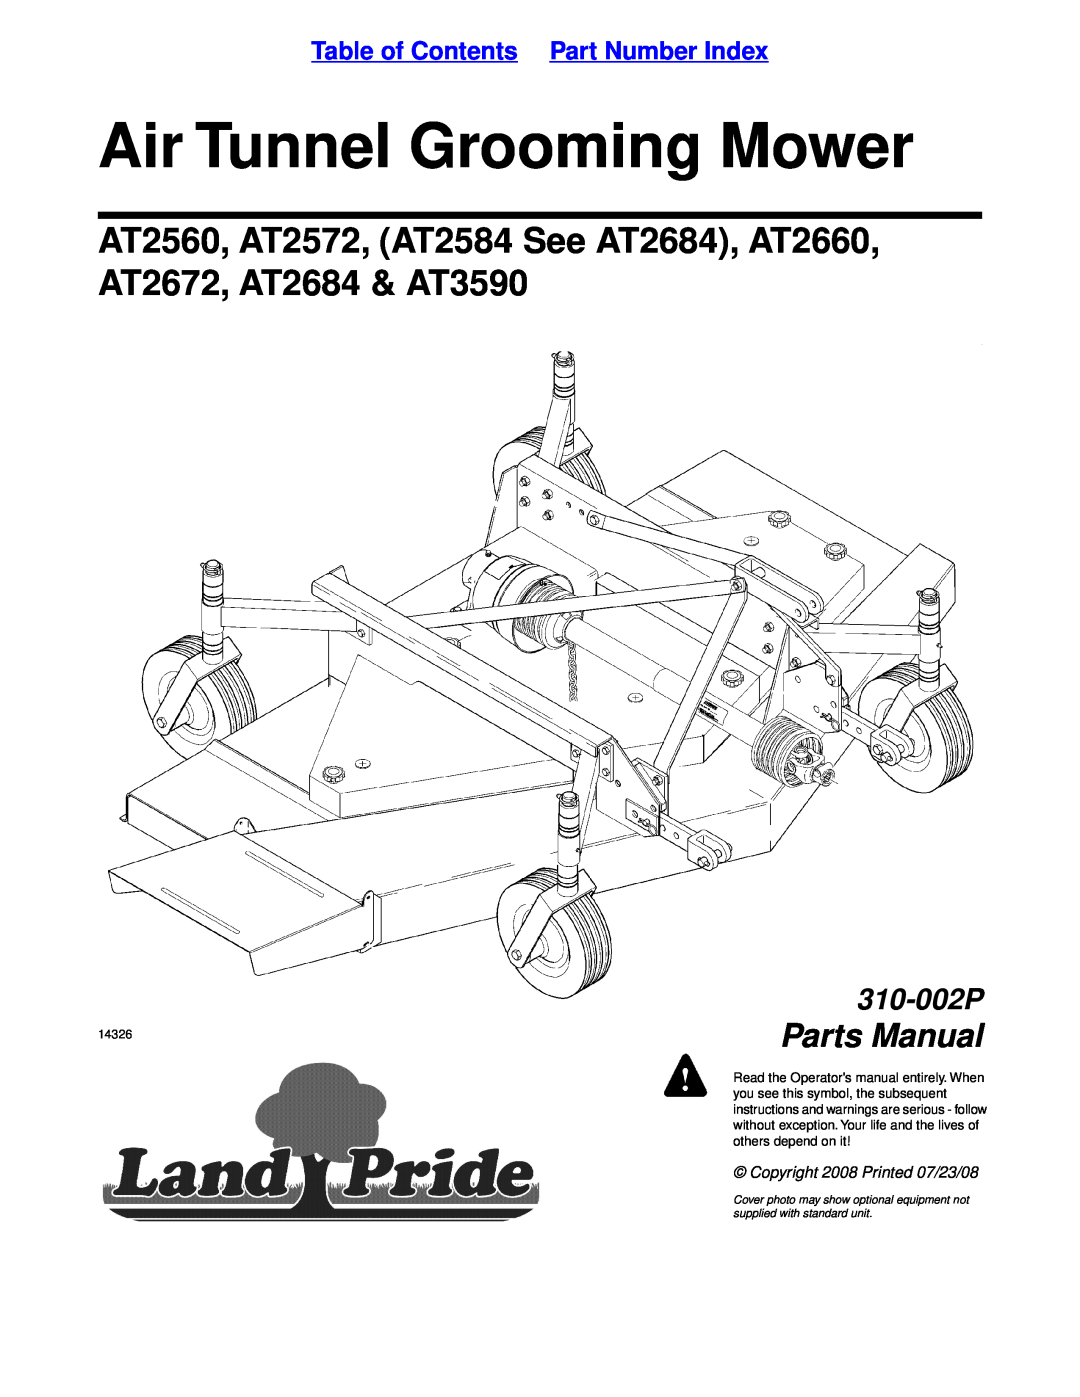 Land Pride AT3590 manual Table of Contents Part Number Index, Air Tunnel Grooming Mower, Parts Manual, 310-002P, 14326 